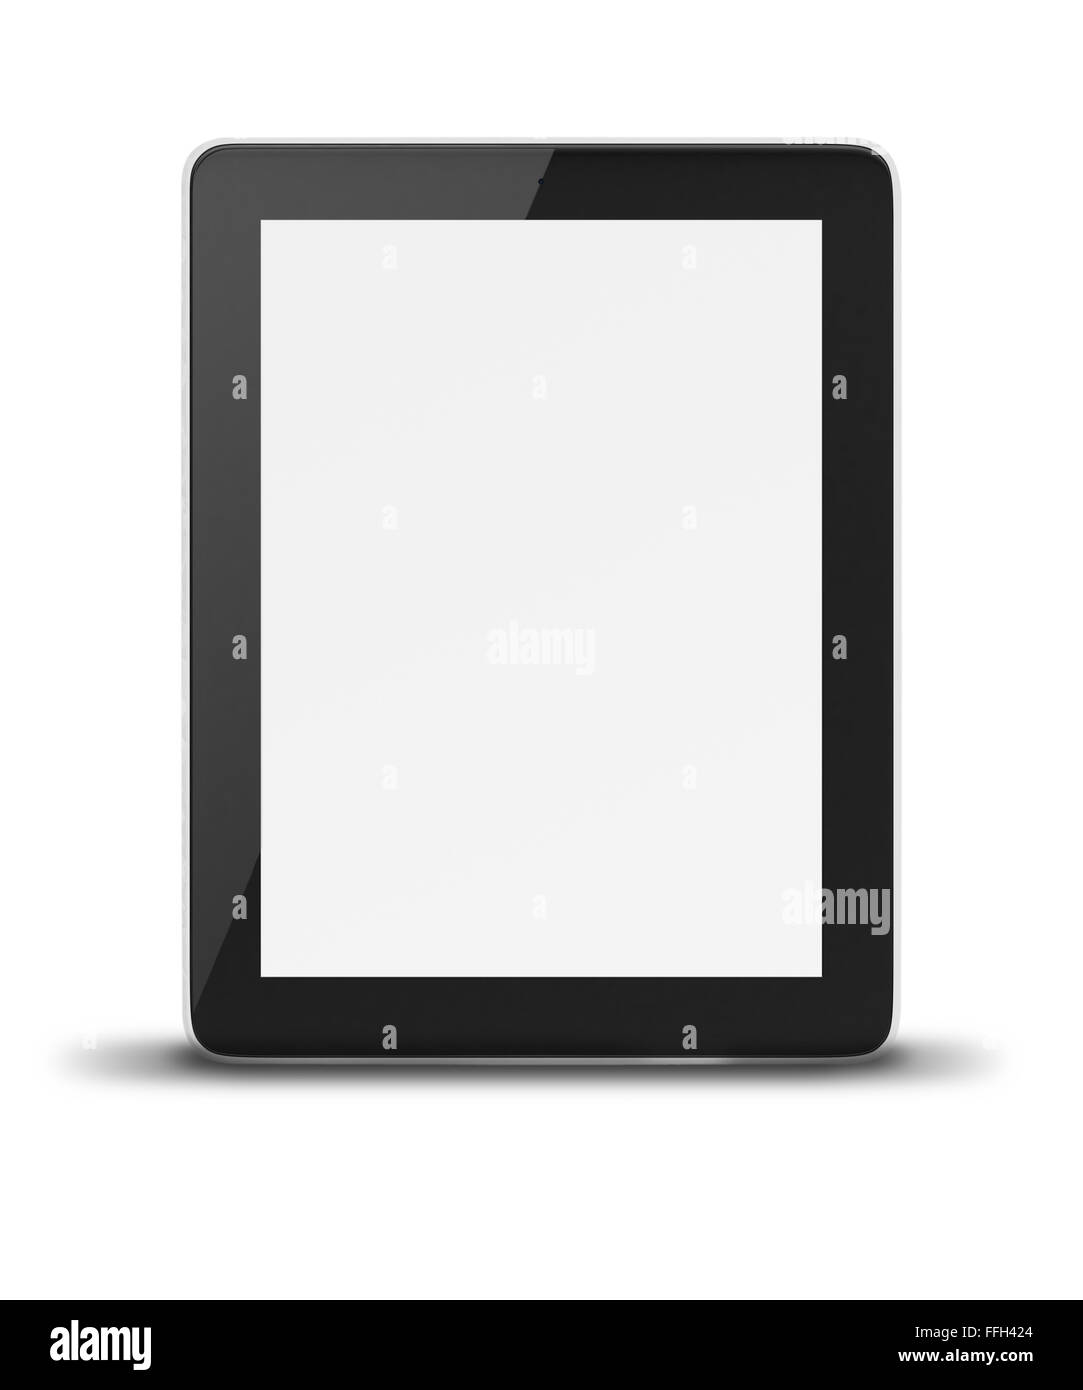 Realistic tablet pc computer with blank screen isolated on white background. Stock Photo